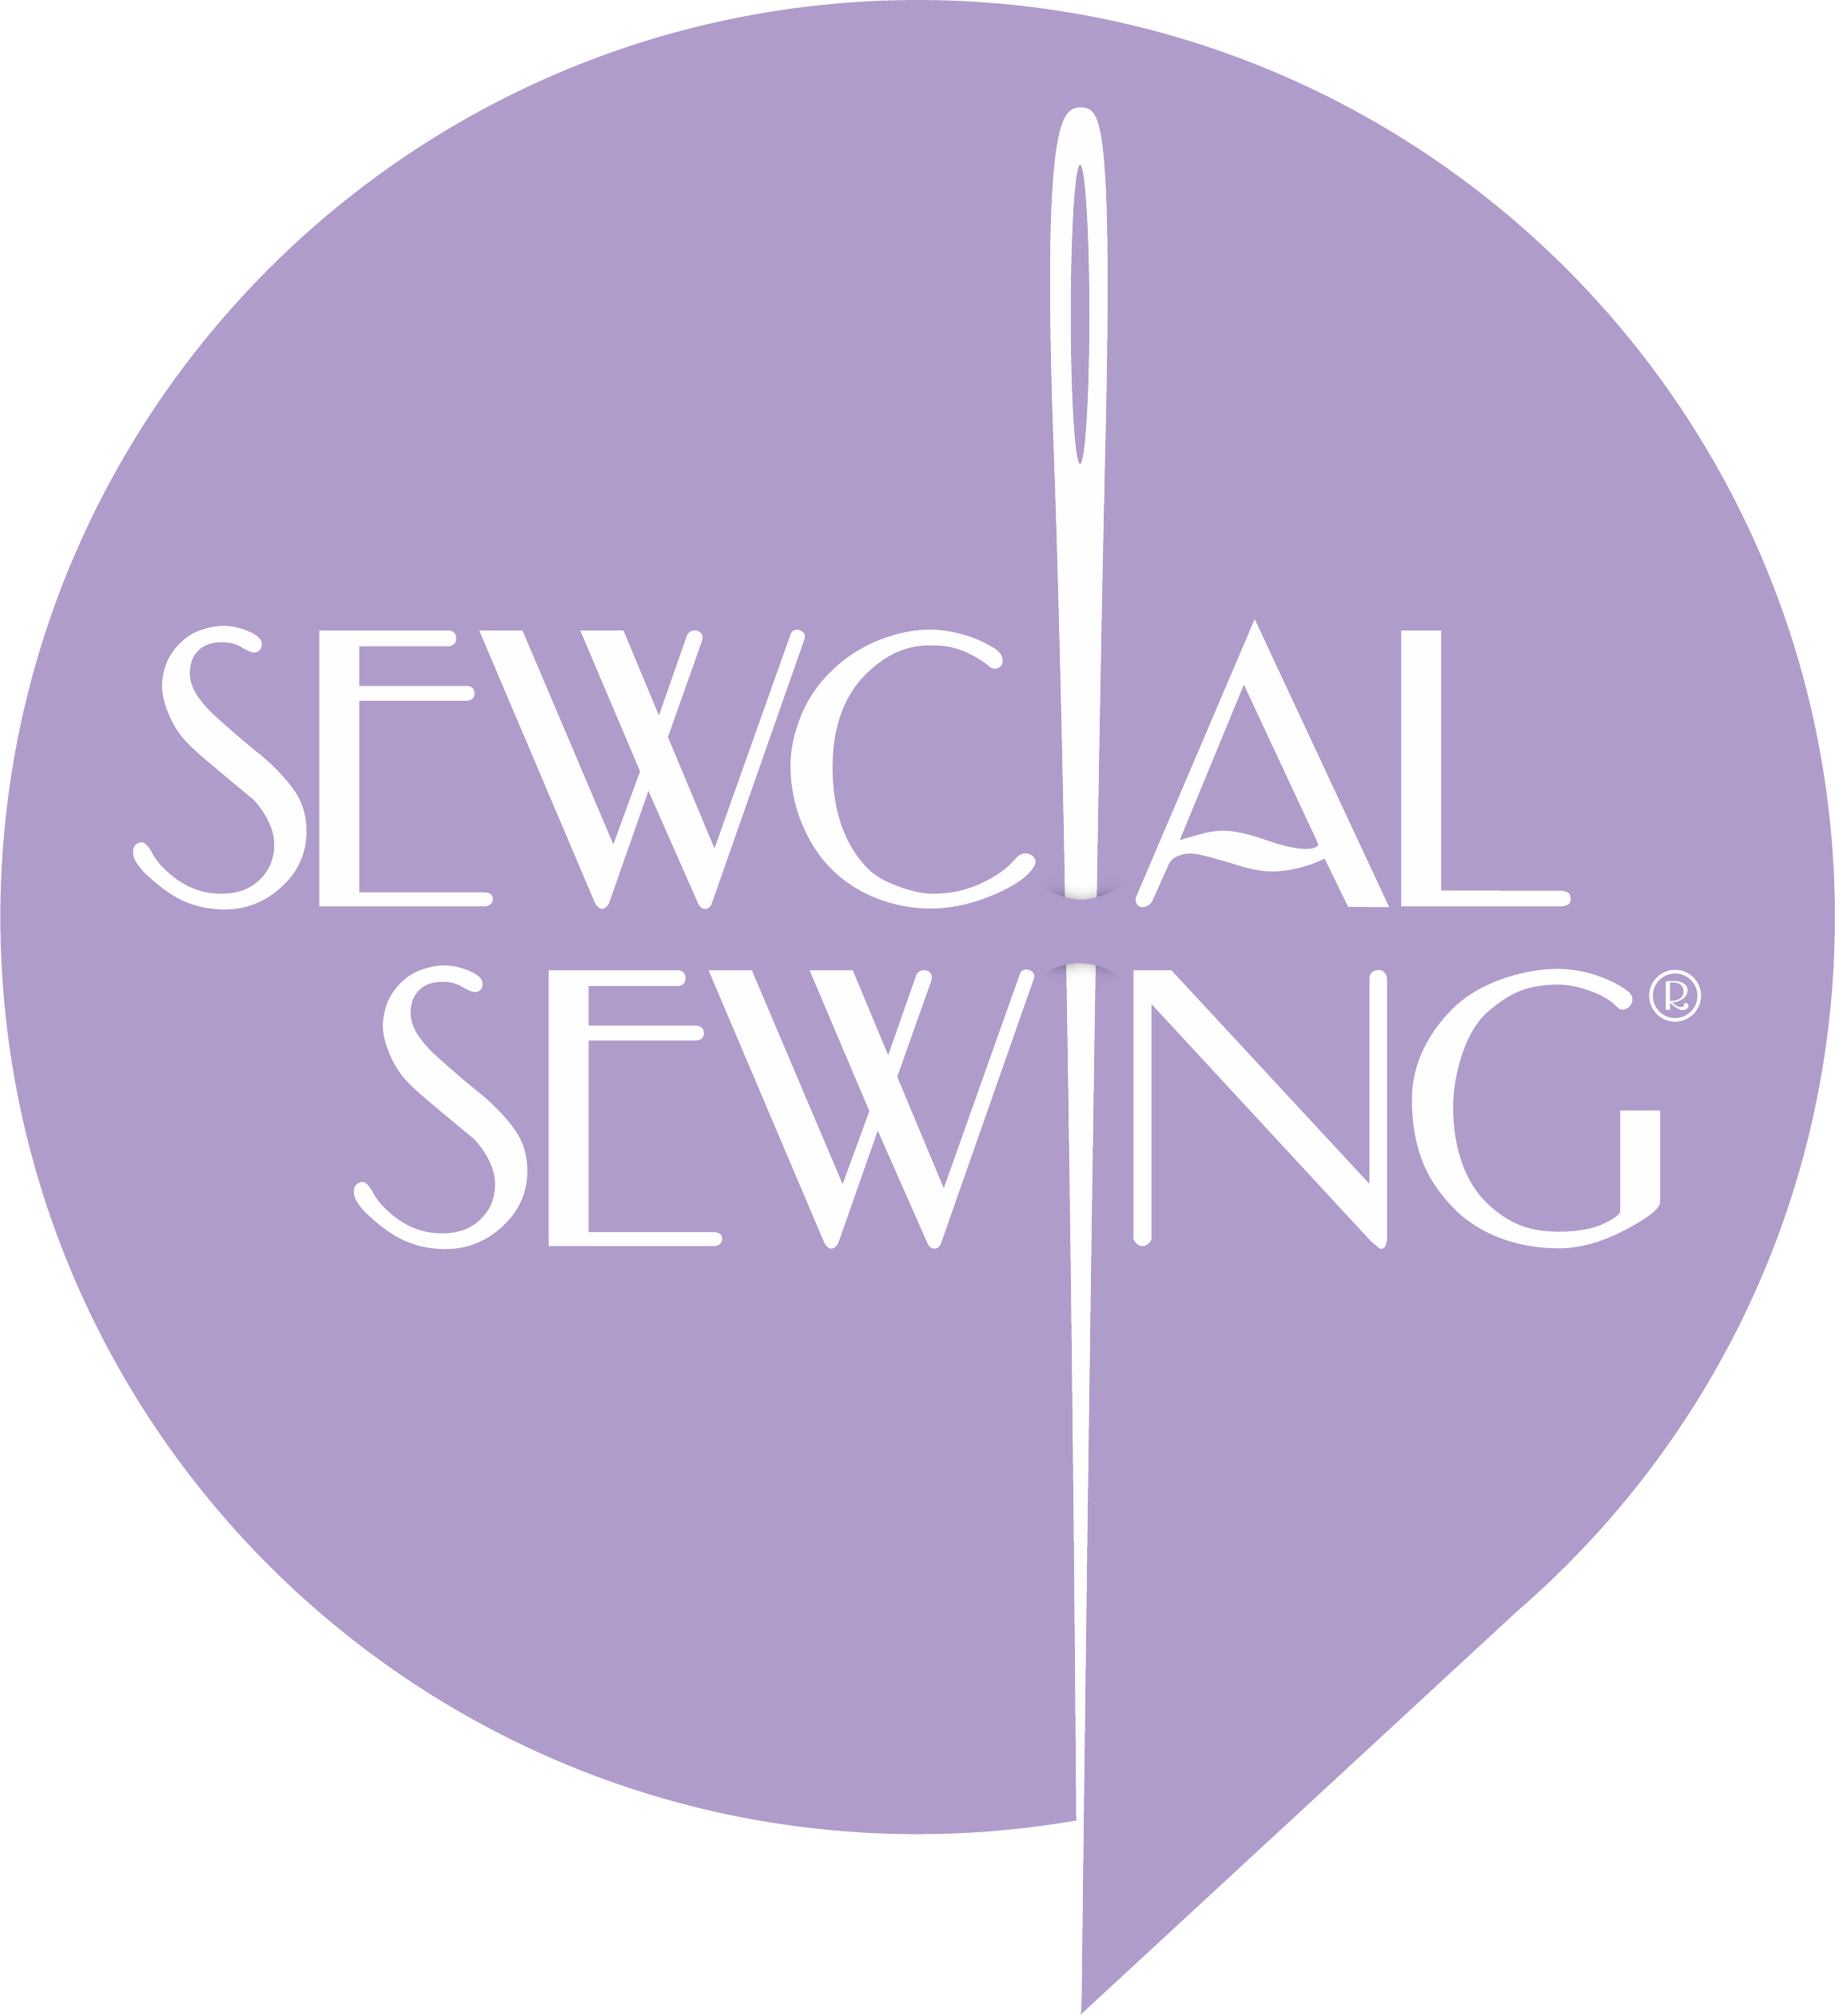 Sewcial Sewing®